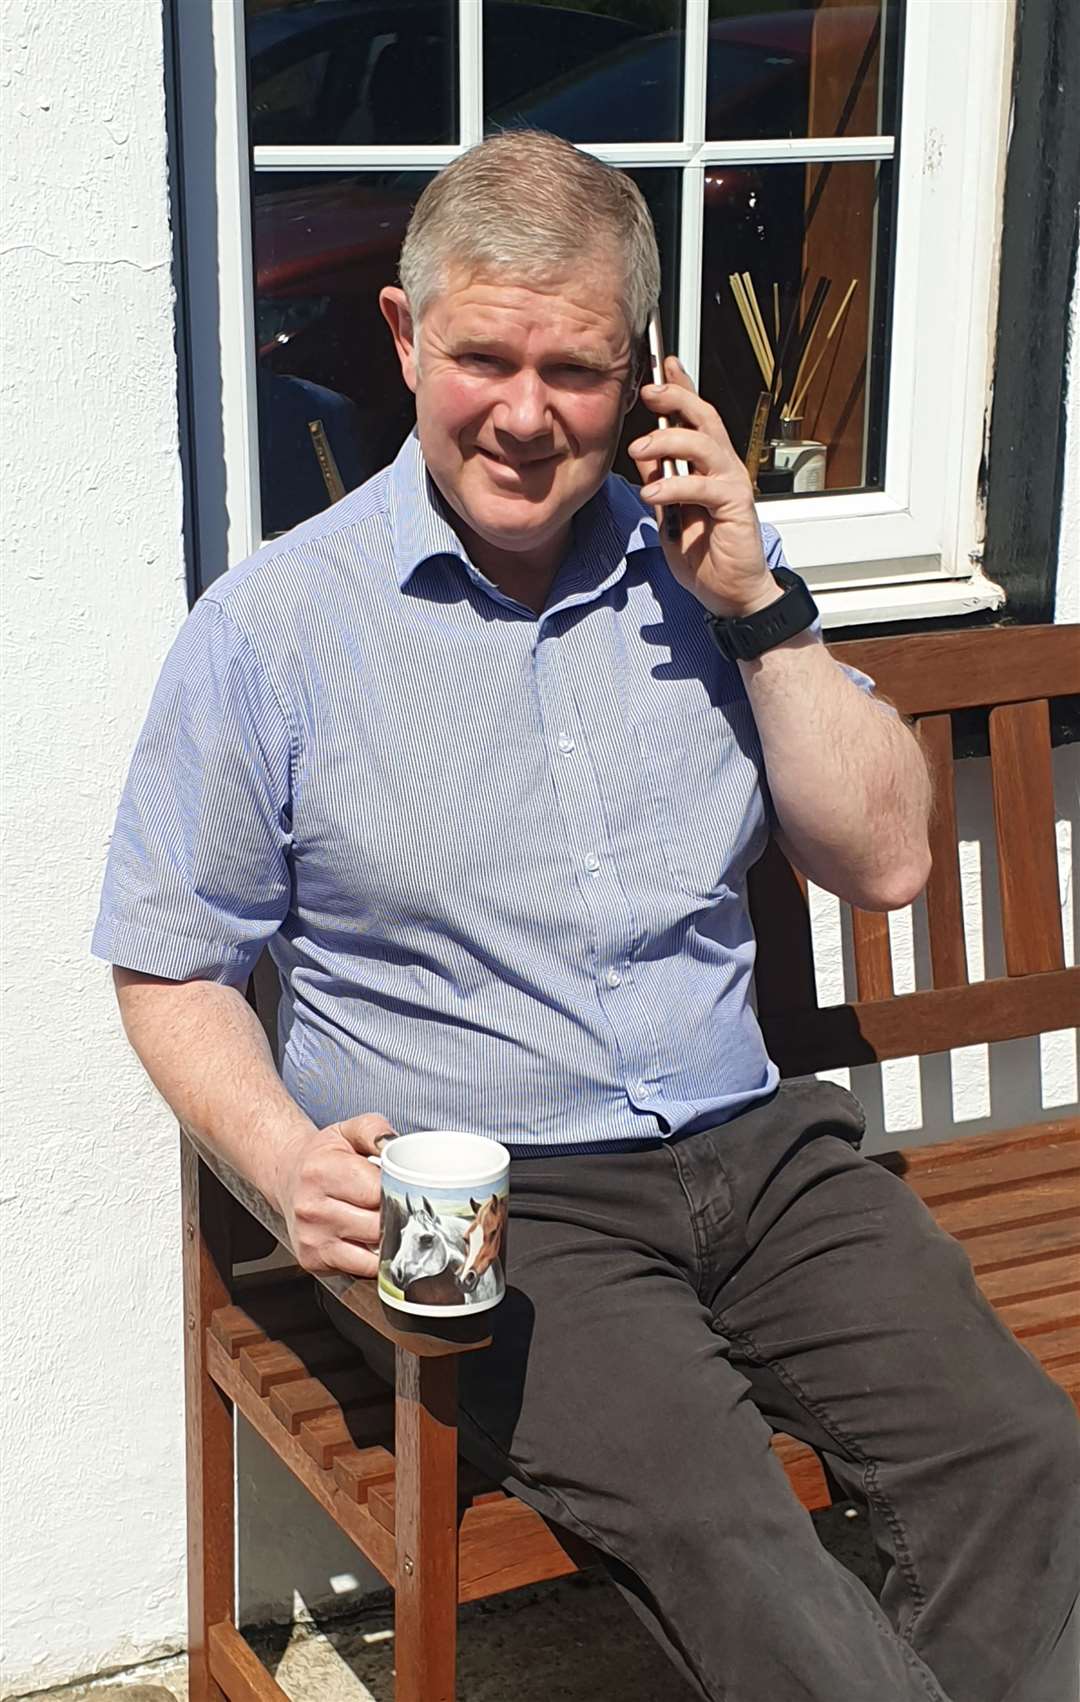 Caithness Befriending volunteer Davy Manson providing the new telephone service which is helping local people feel connected.